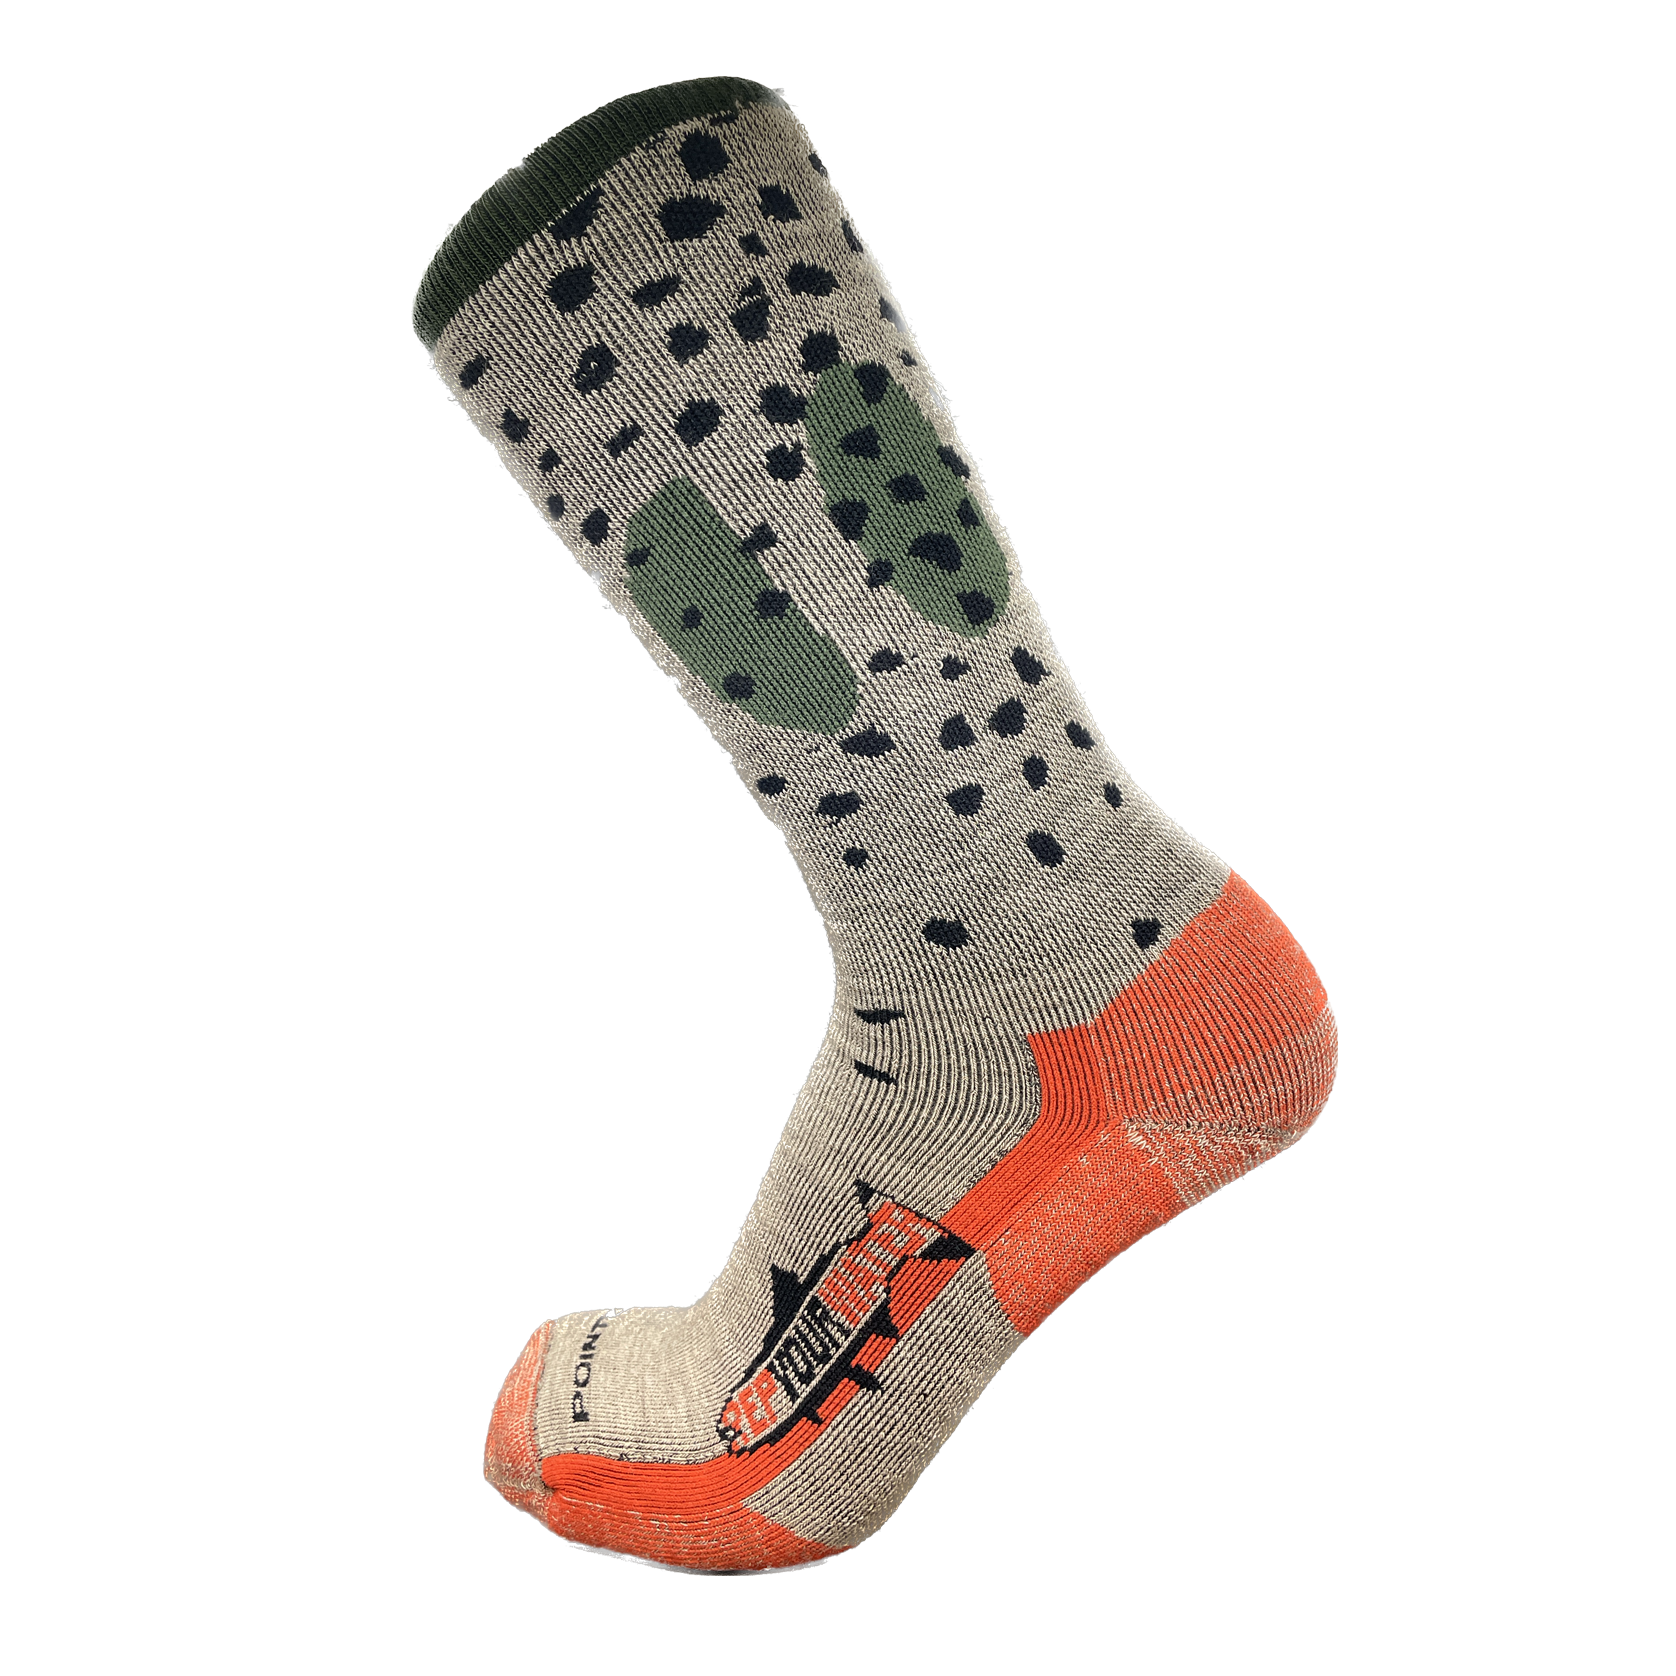 A sock with the pattern of a cutthroat trout also has a logo on the foot that reads repyourwater in a trout silhouette